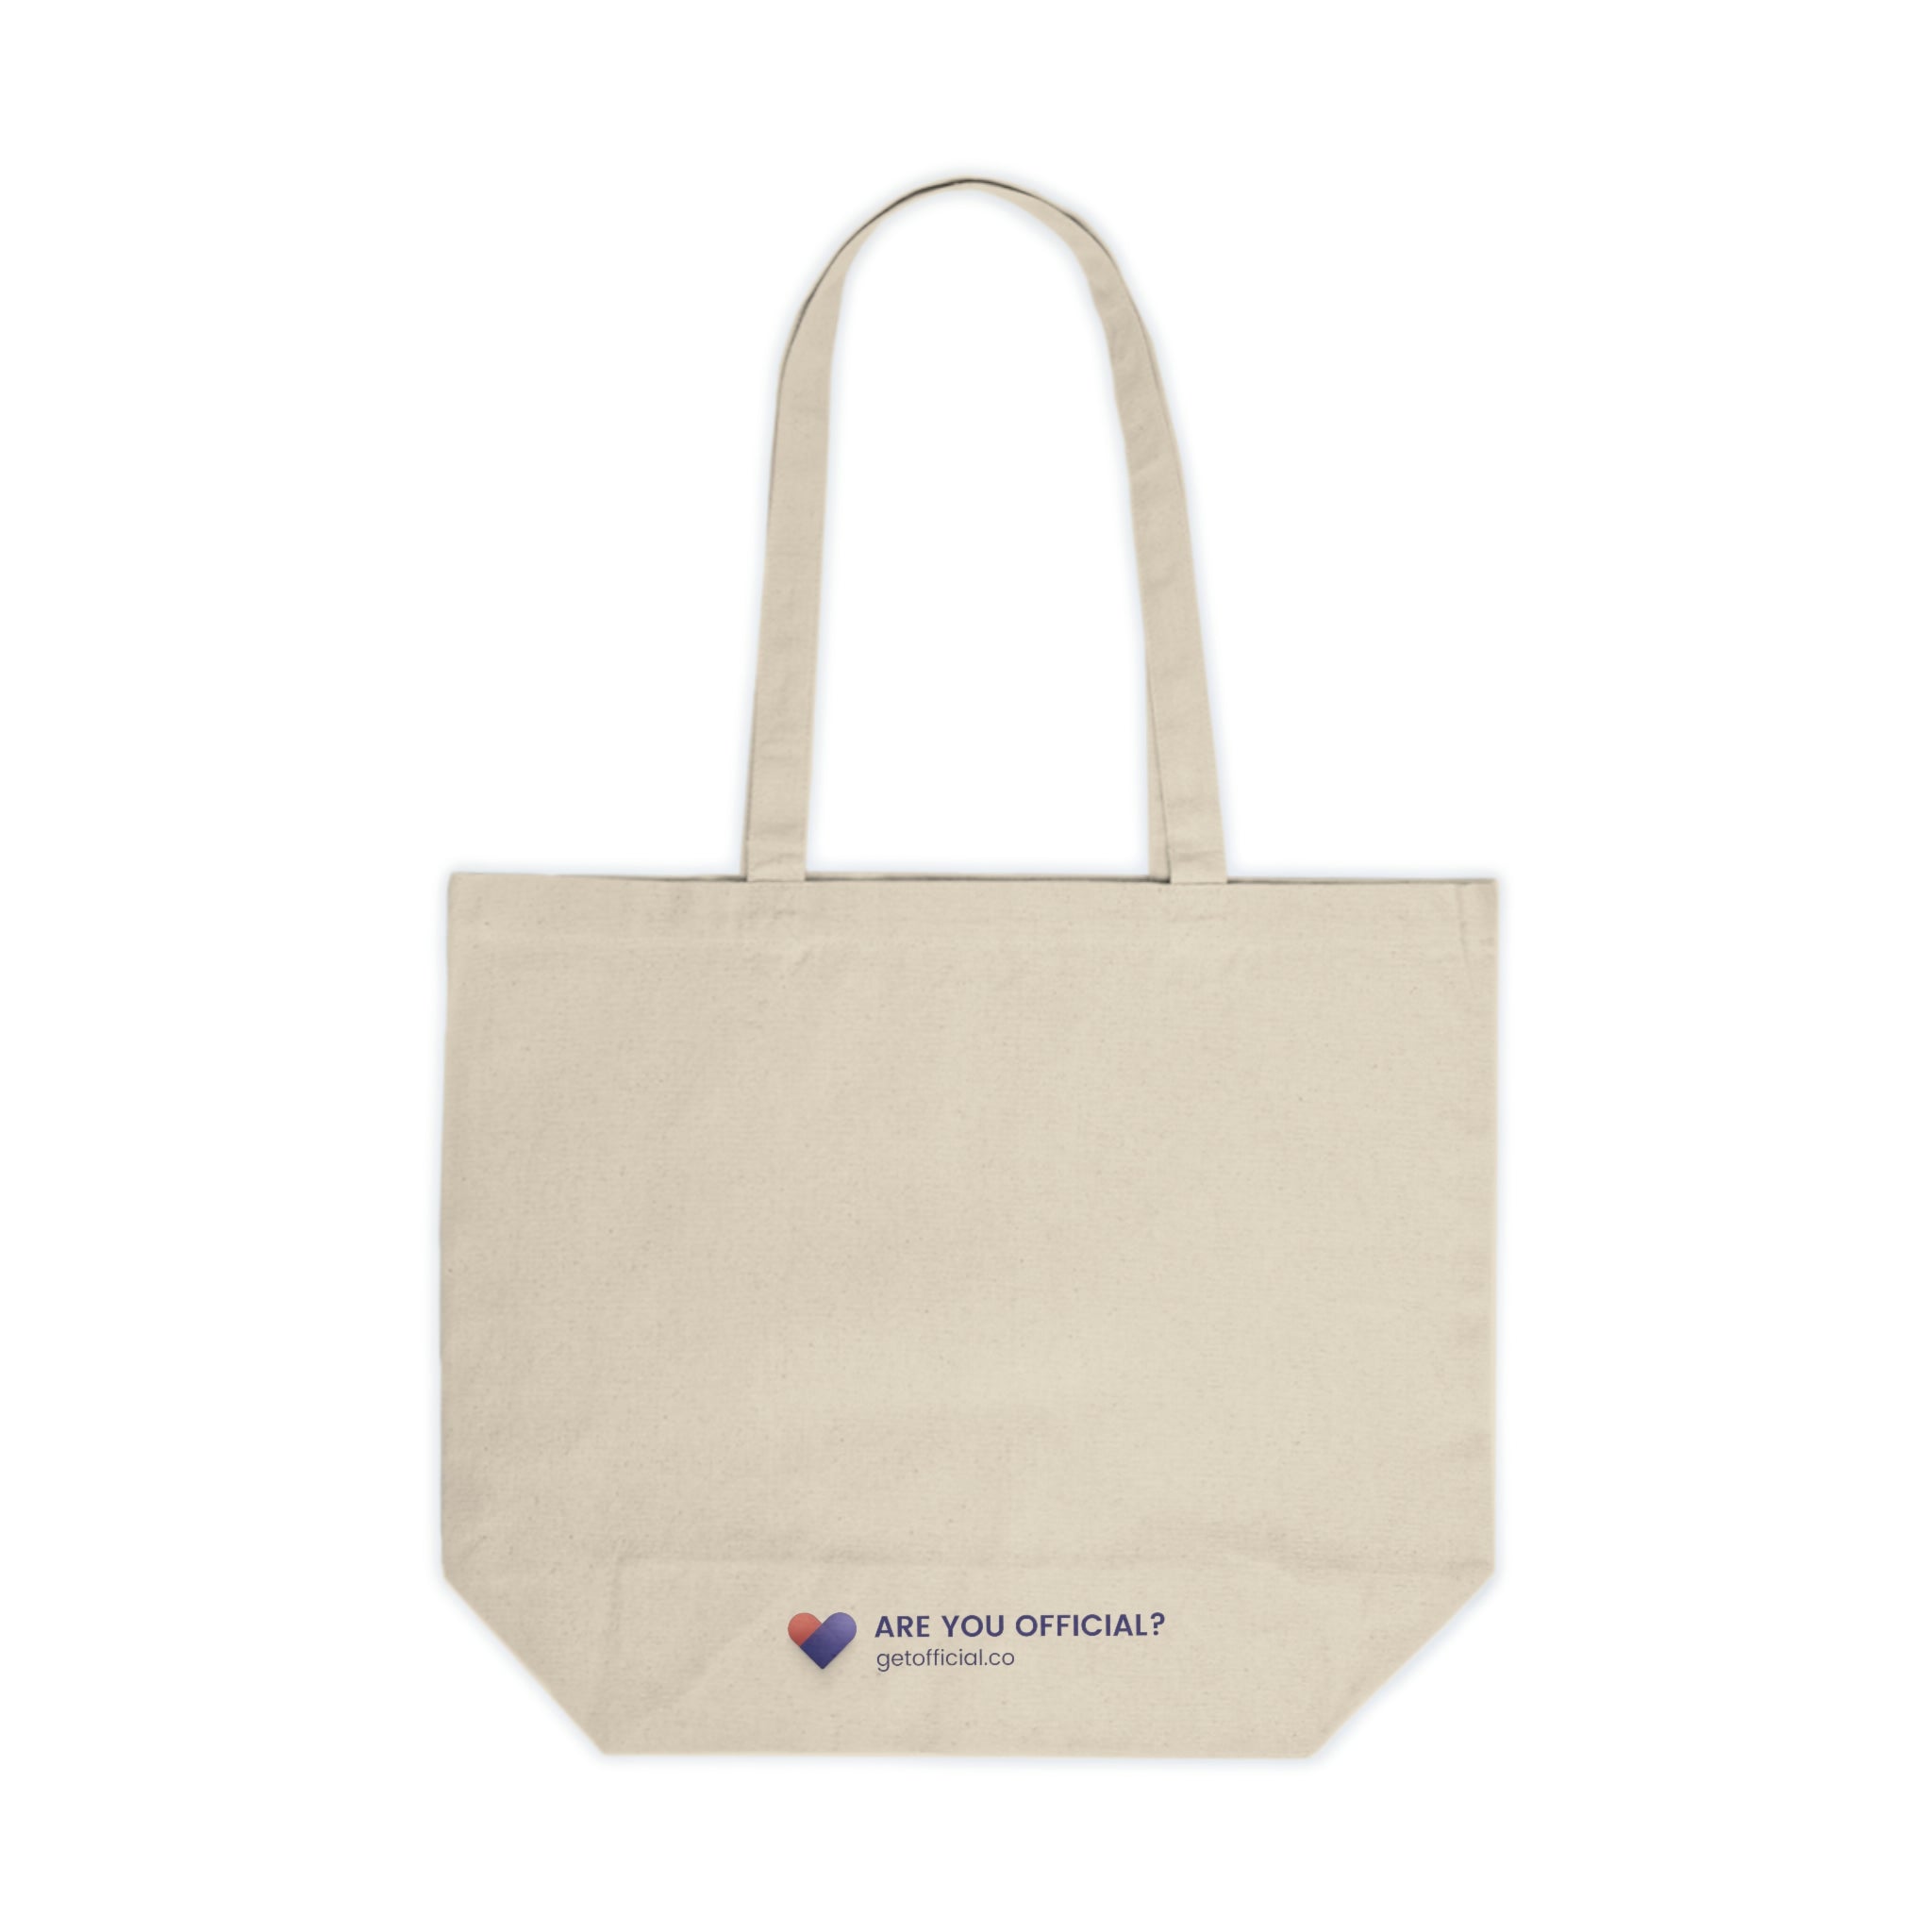 Antisocial Together Shopping Tote